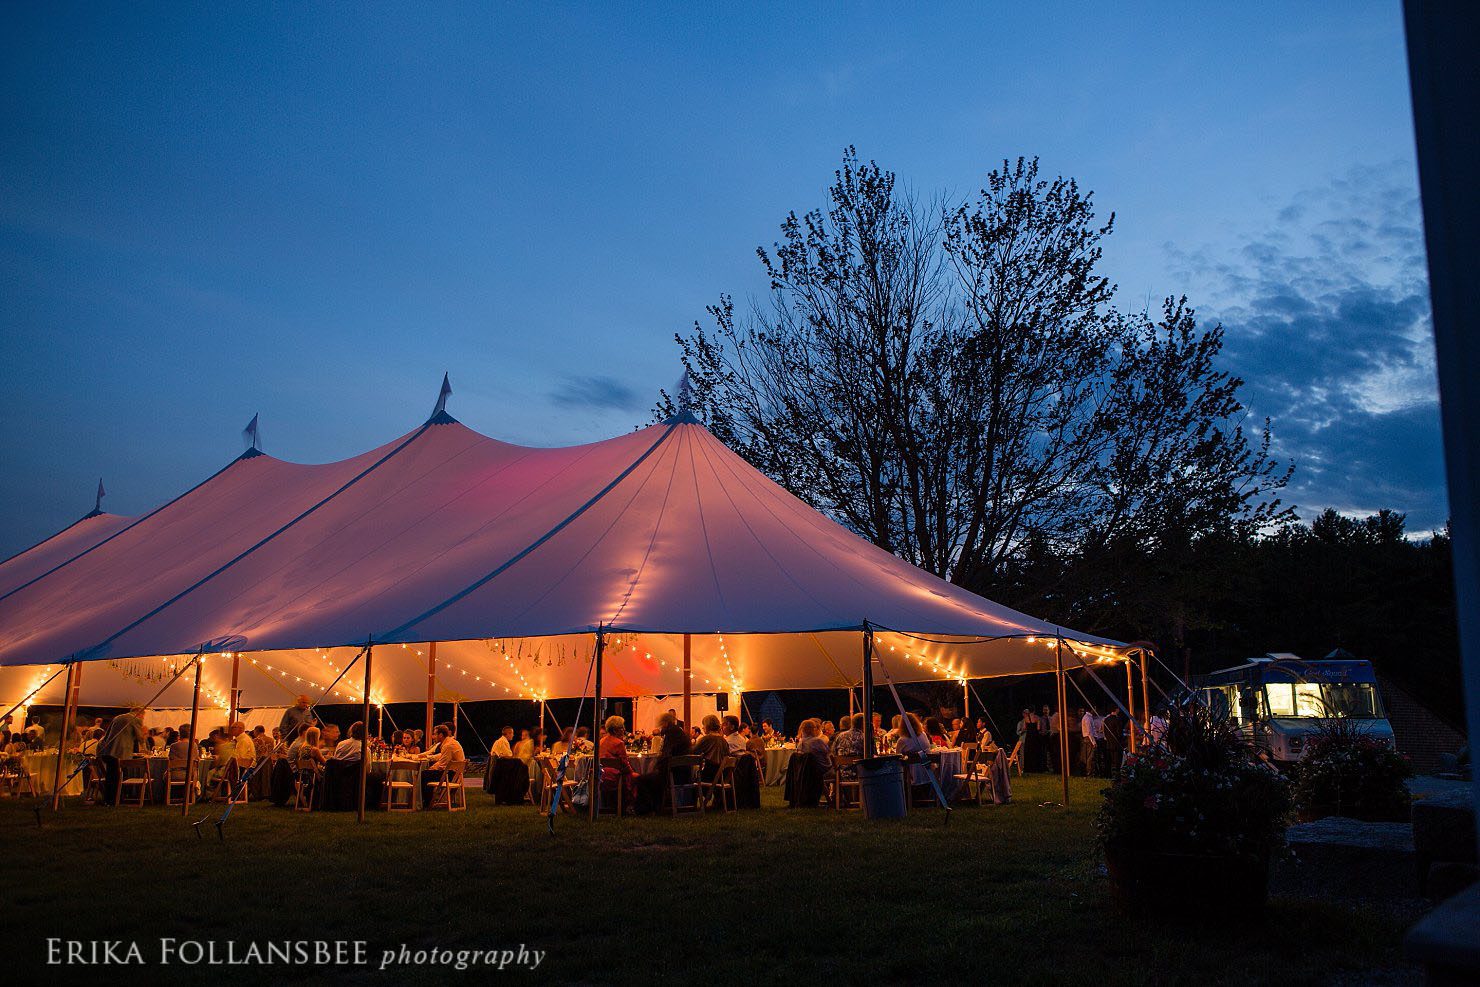 The sailcloth tent glows festively against the evening sky